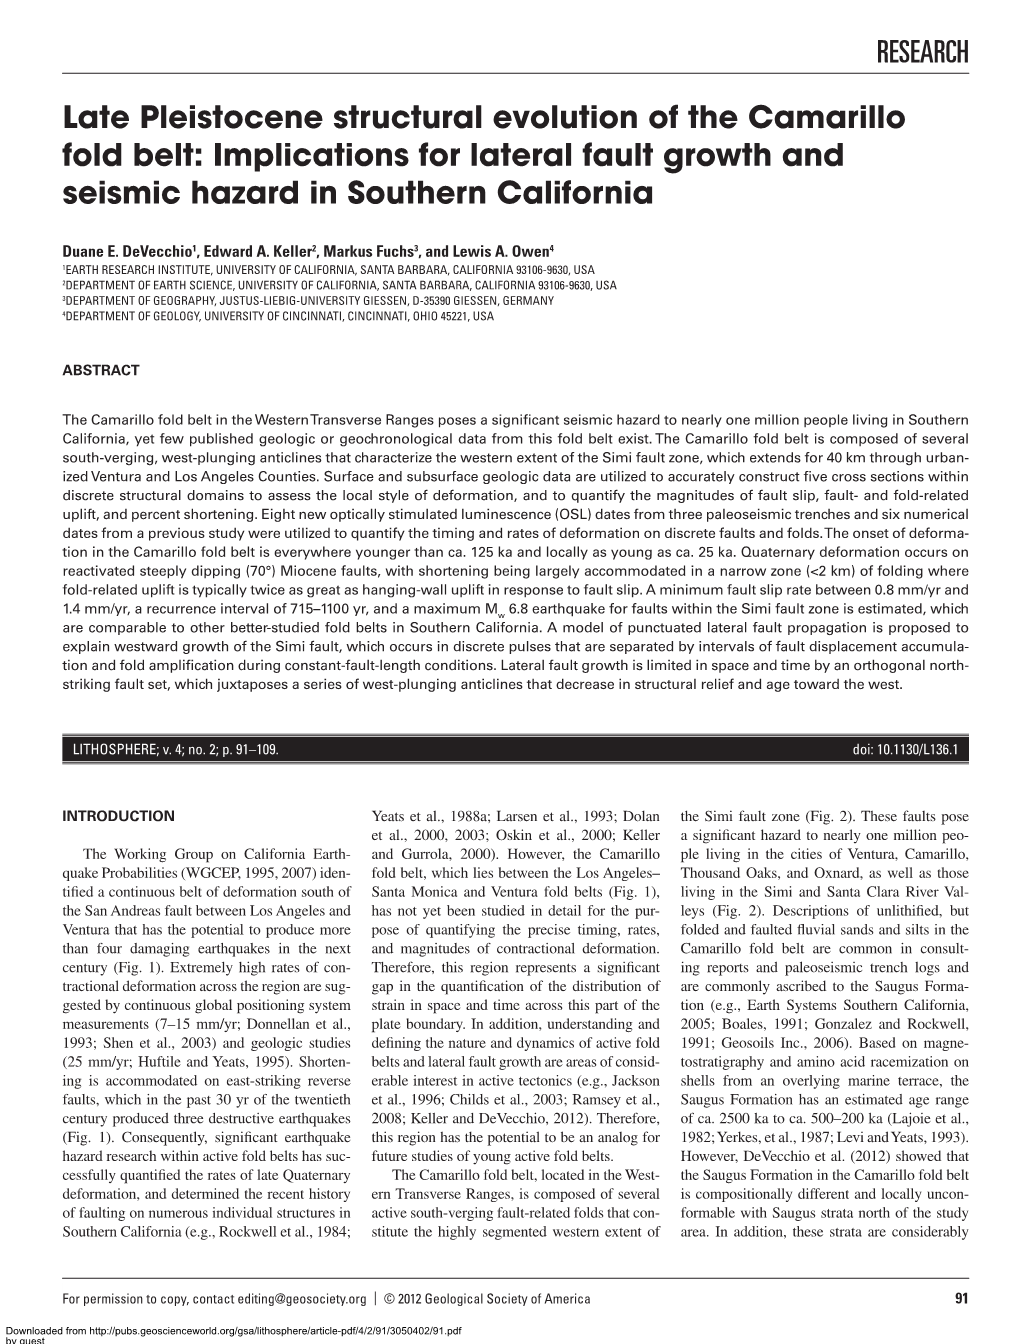 Late Pleistocene Structural Evolution of the Camarillo Fold Belt: Implications for Lateral Fault Growth and Seismic Hazard in Southern California